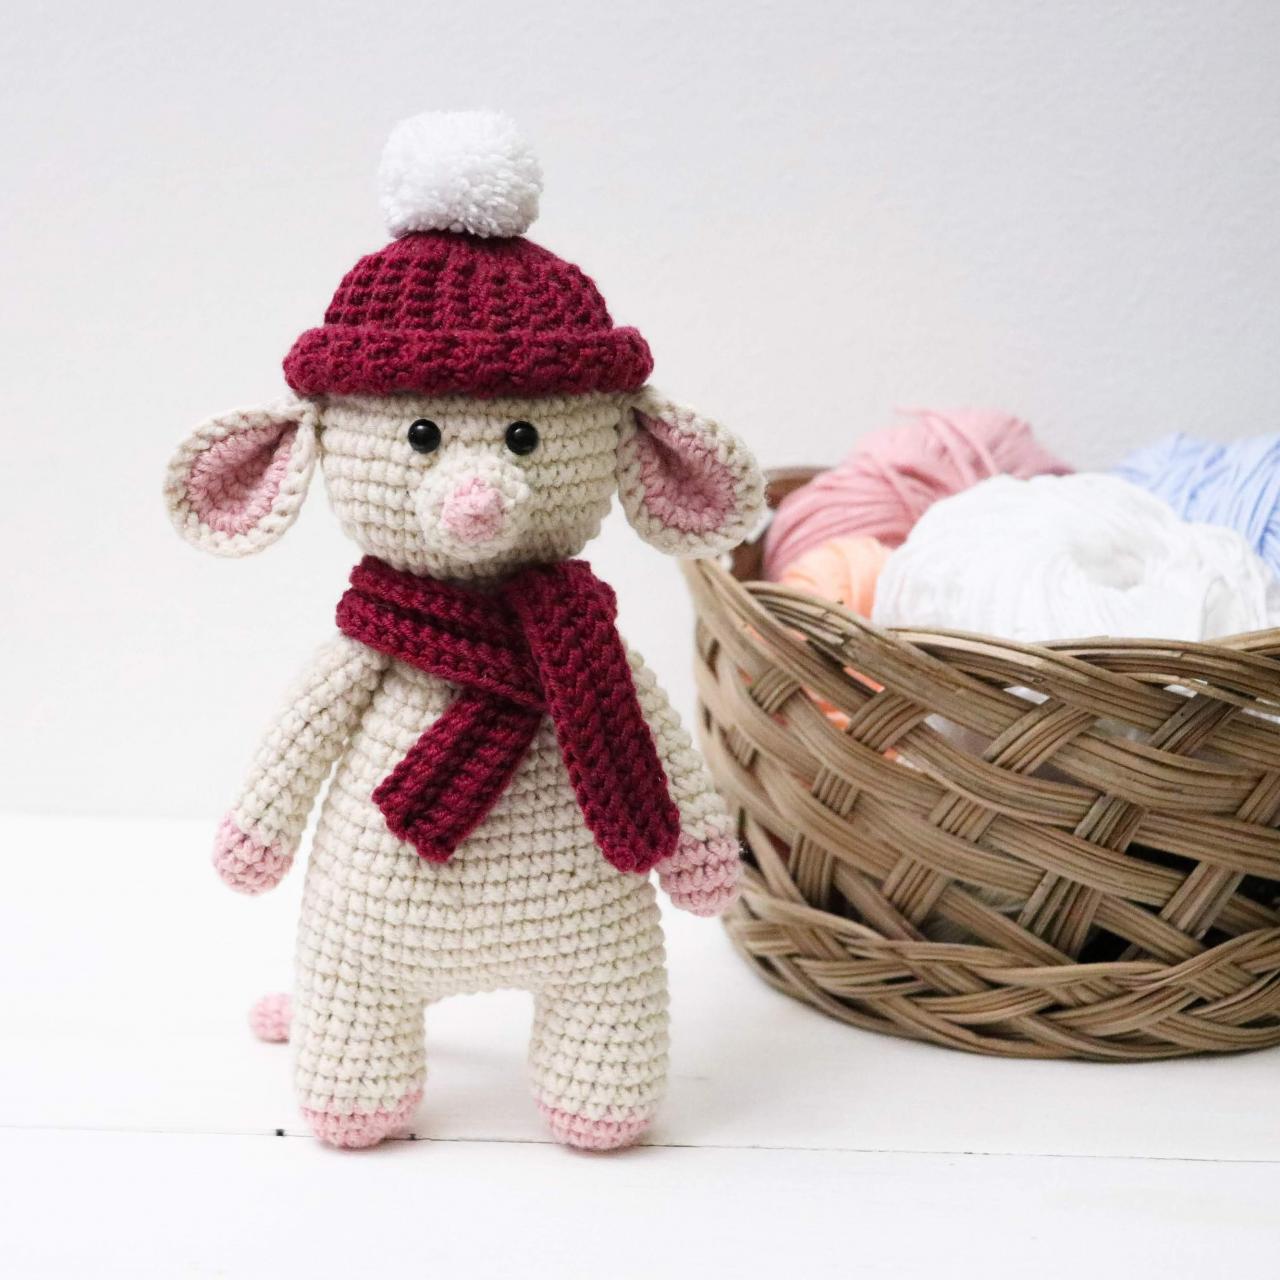 Amigurumi mouse Crochet mouse Plush mouse Stuffed mouse toy Crochet animal Baby soft toy Newborn baby gift Baby shower gift